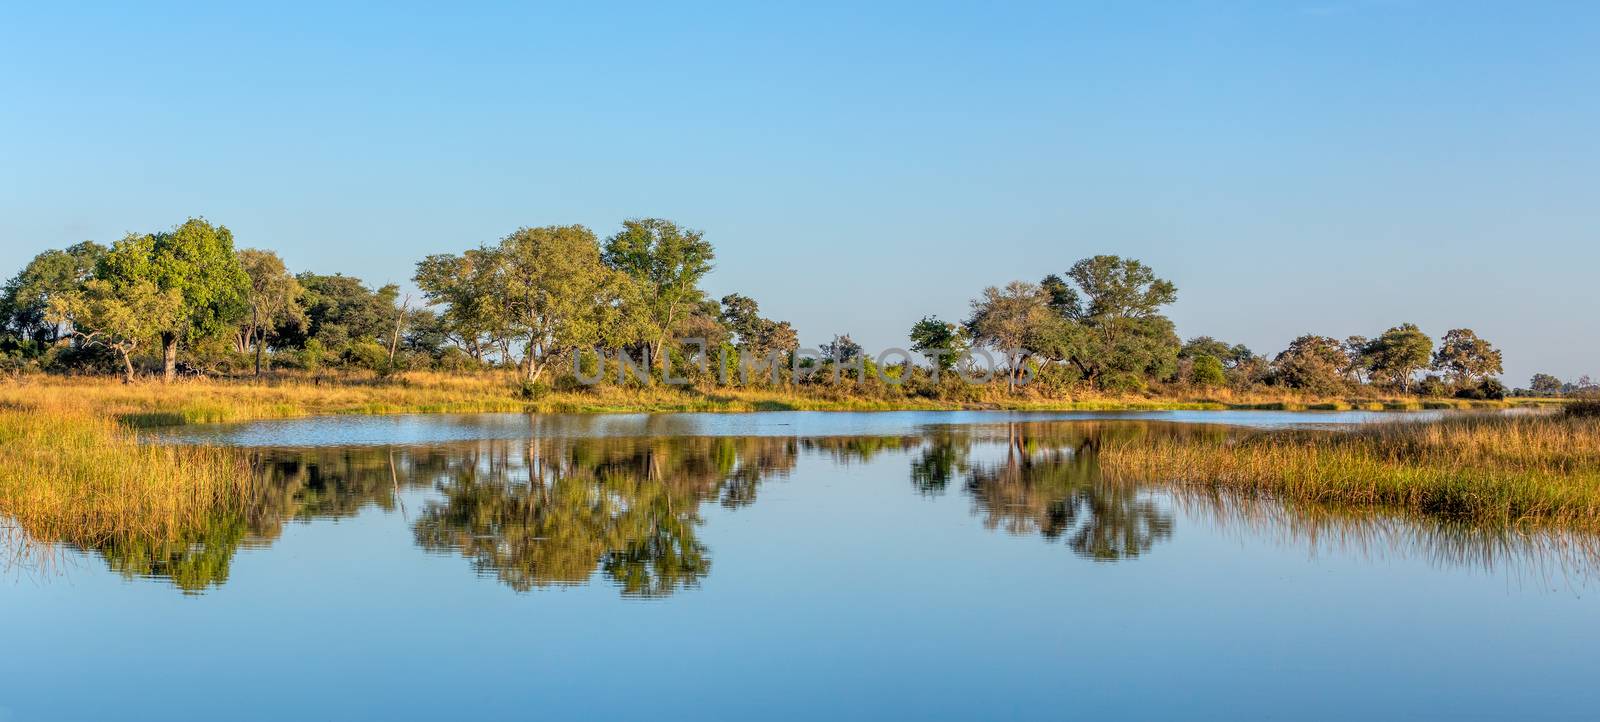 typical African river landscape, Bwabwata, Namibia by artush